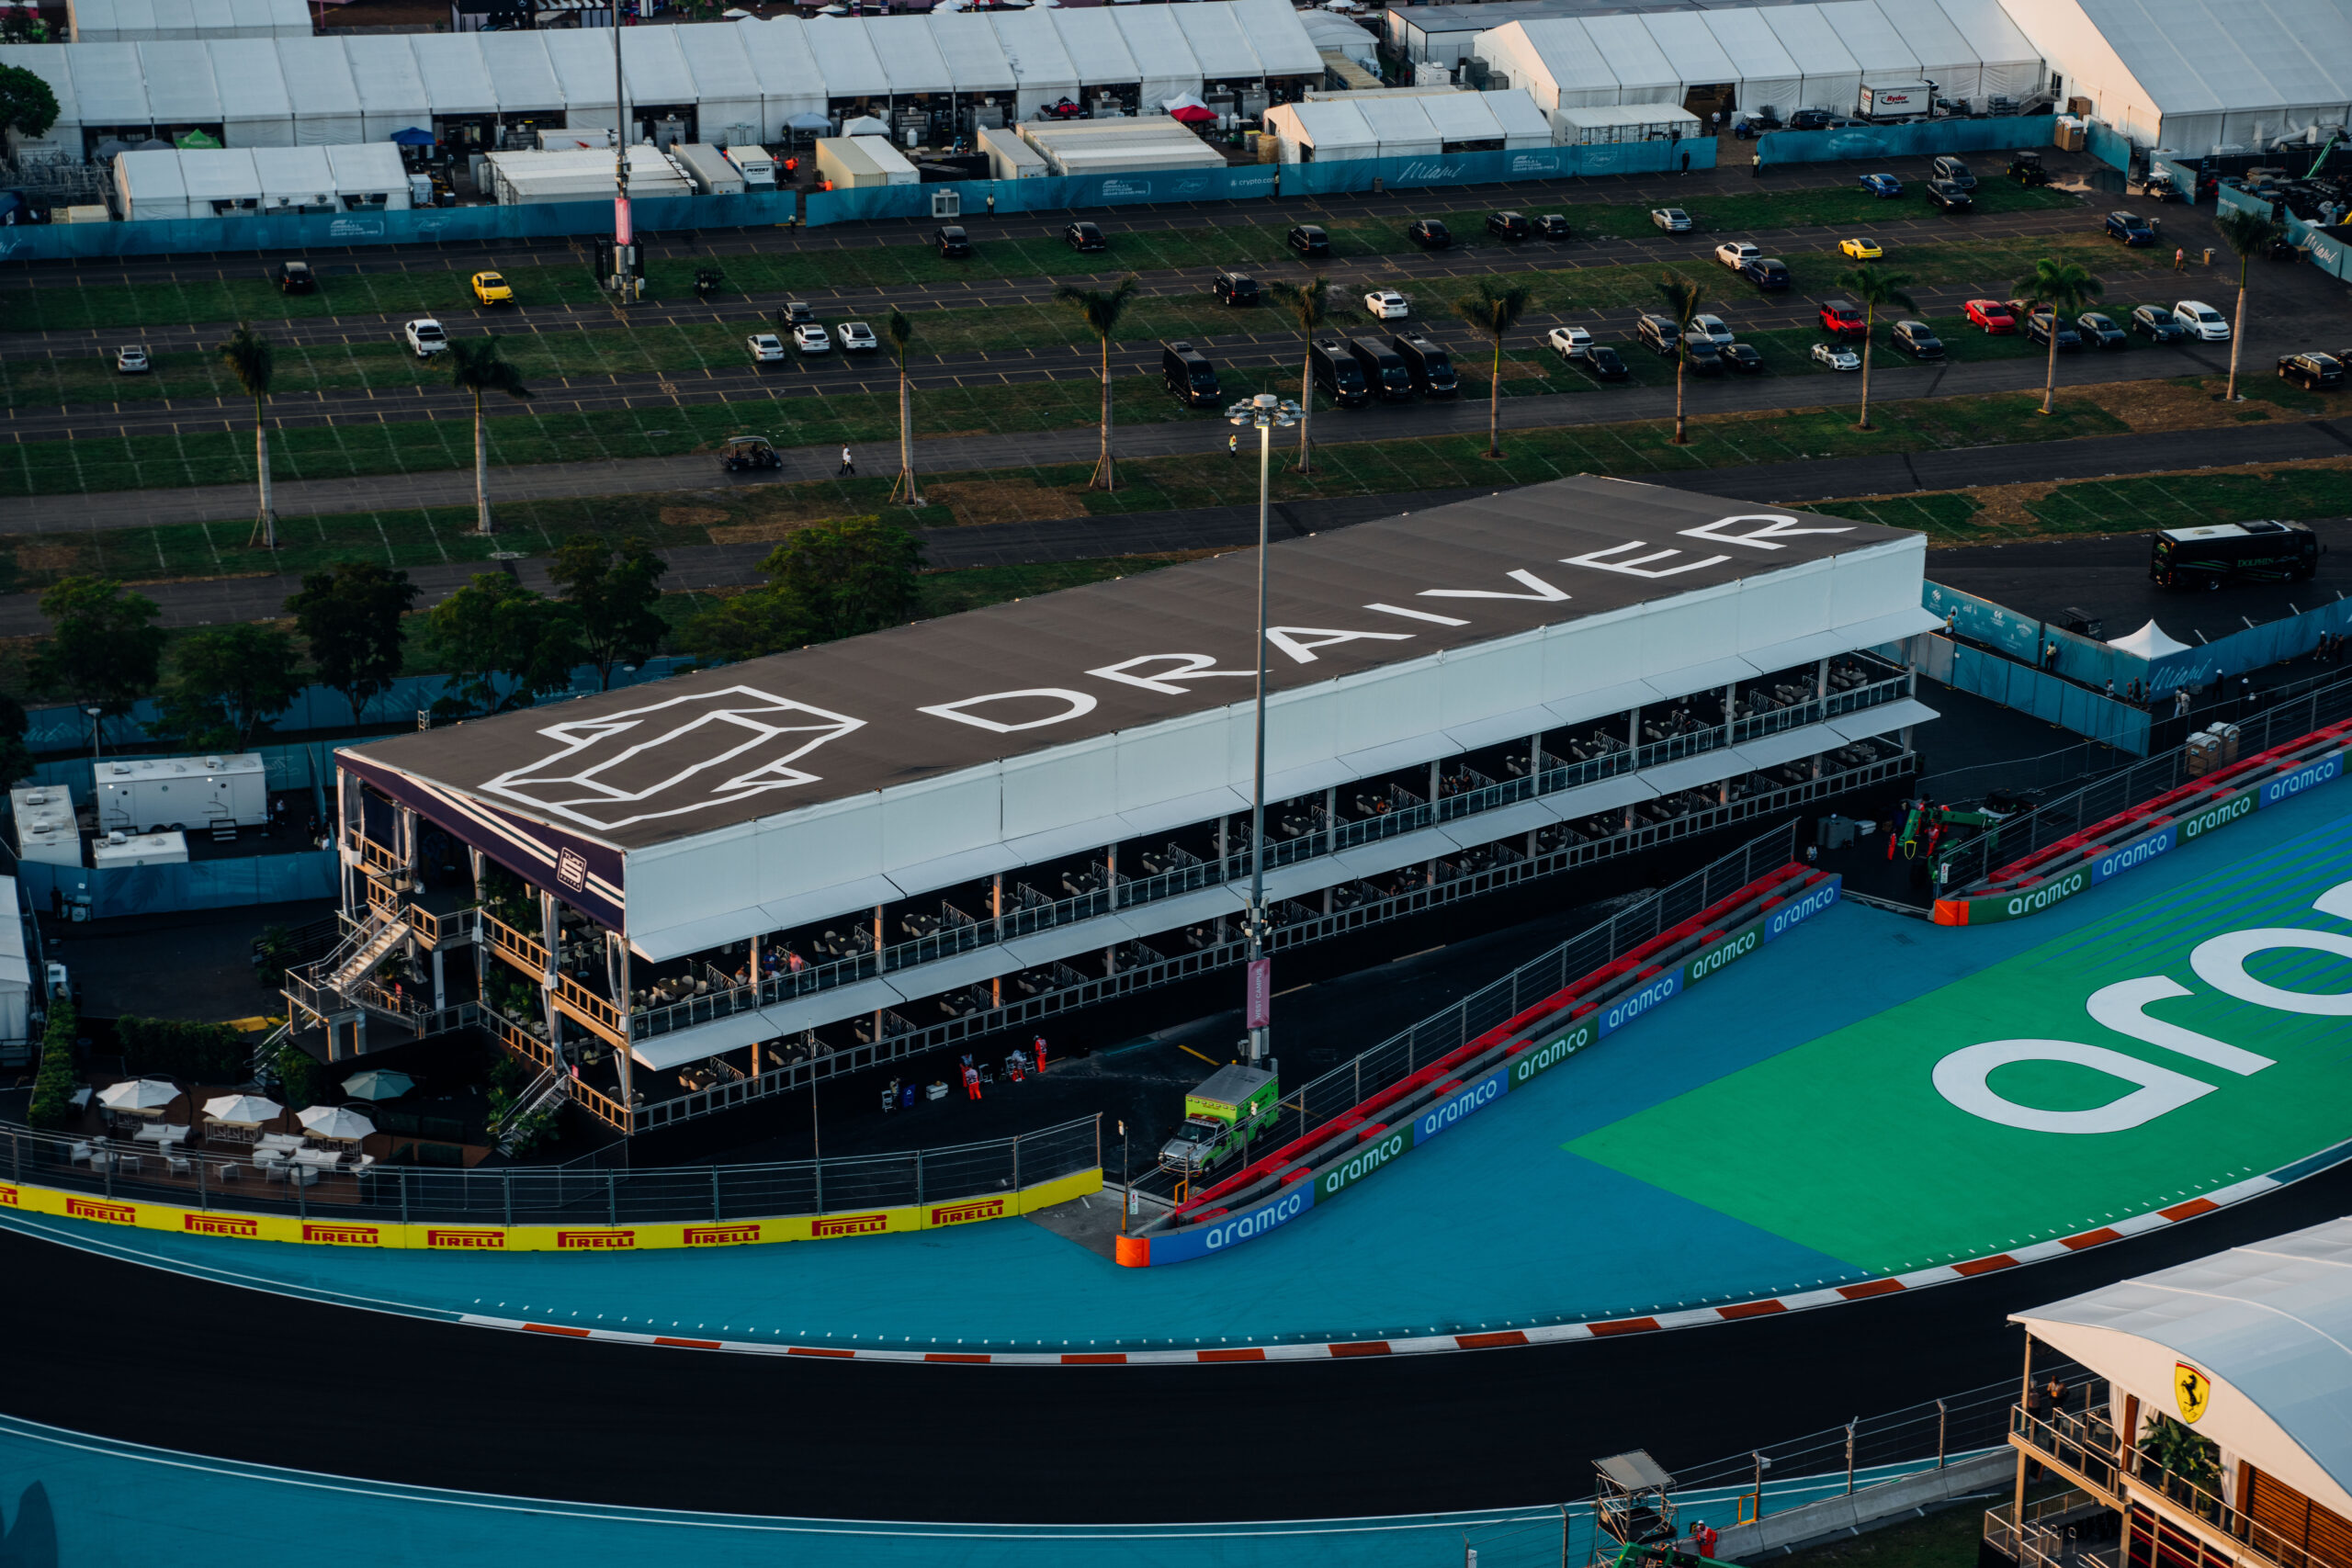 The Turn 5 Suites provide a trackside view of one of the fastest cornering sections of the circuit at the Miami International Autodrome.